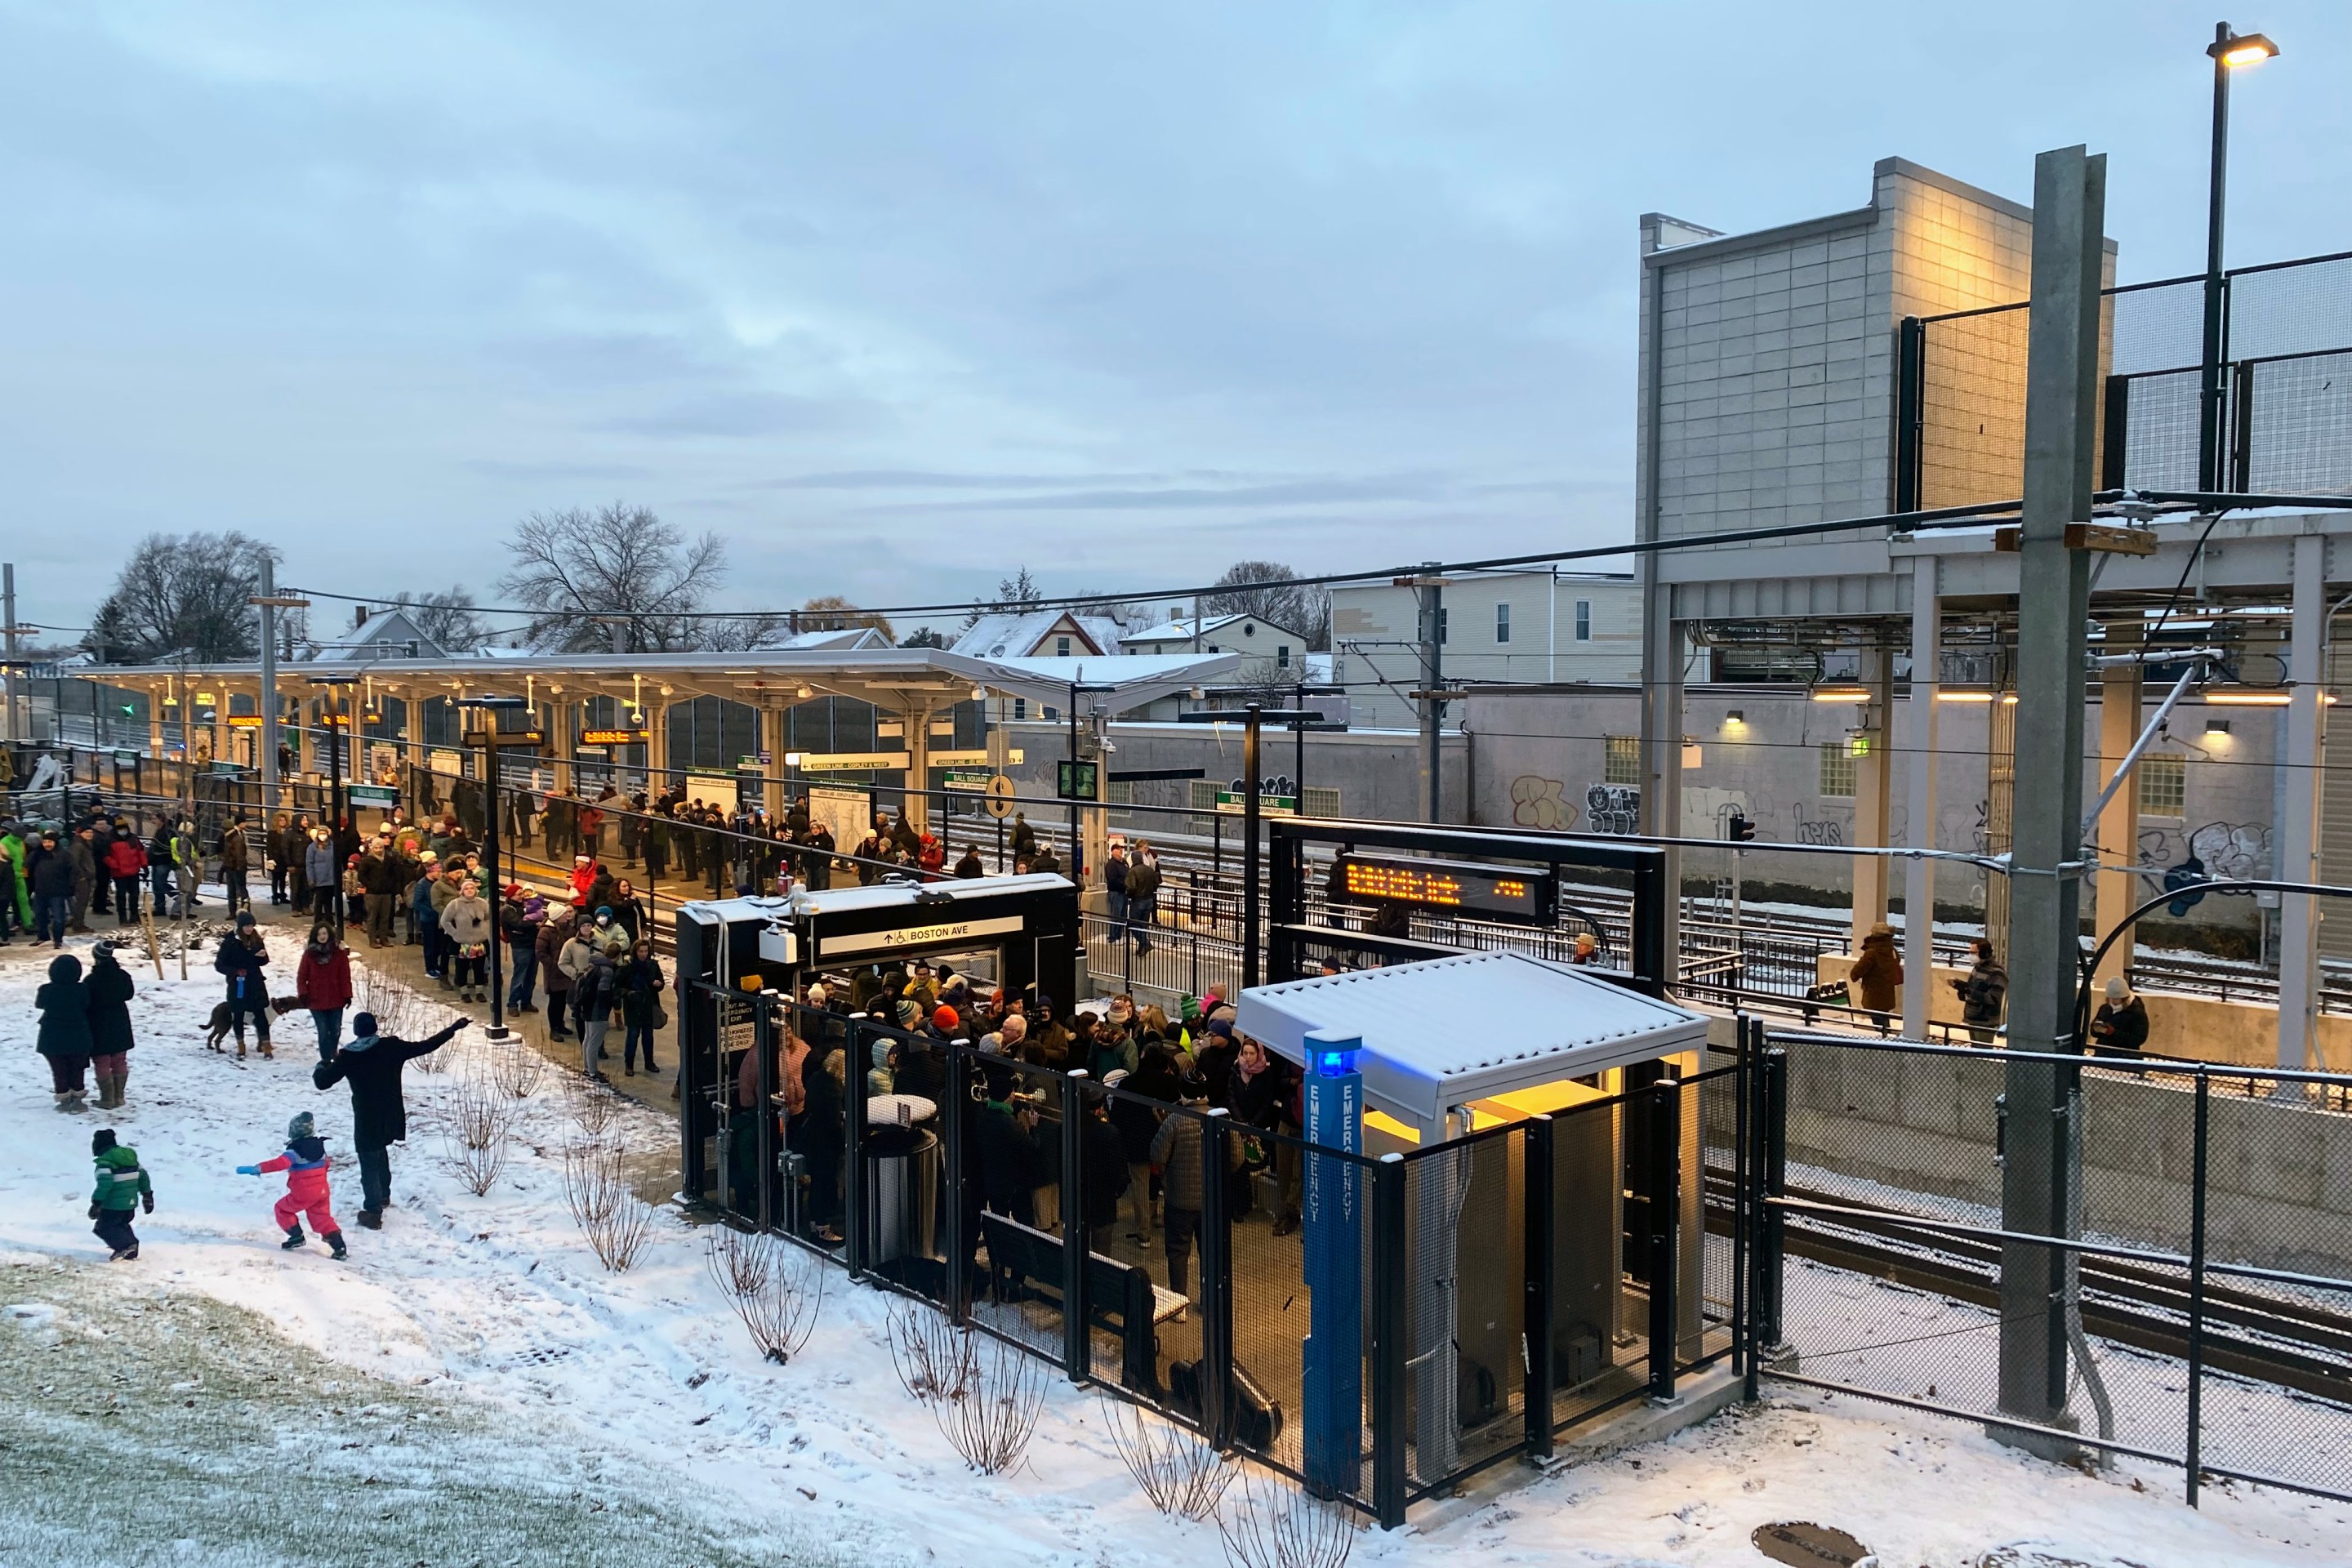 A large crowd of people celebrate the Green Line extension's opening day outside a snowy Ball Square station while some kids play on a snowy hillside next to the station entrance.